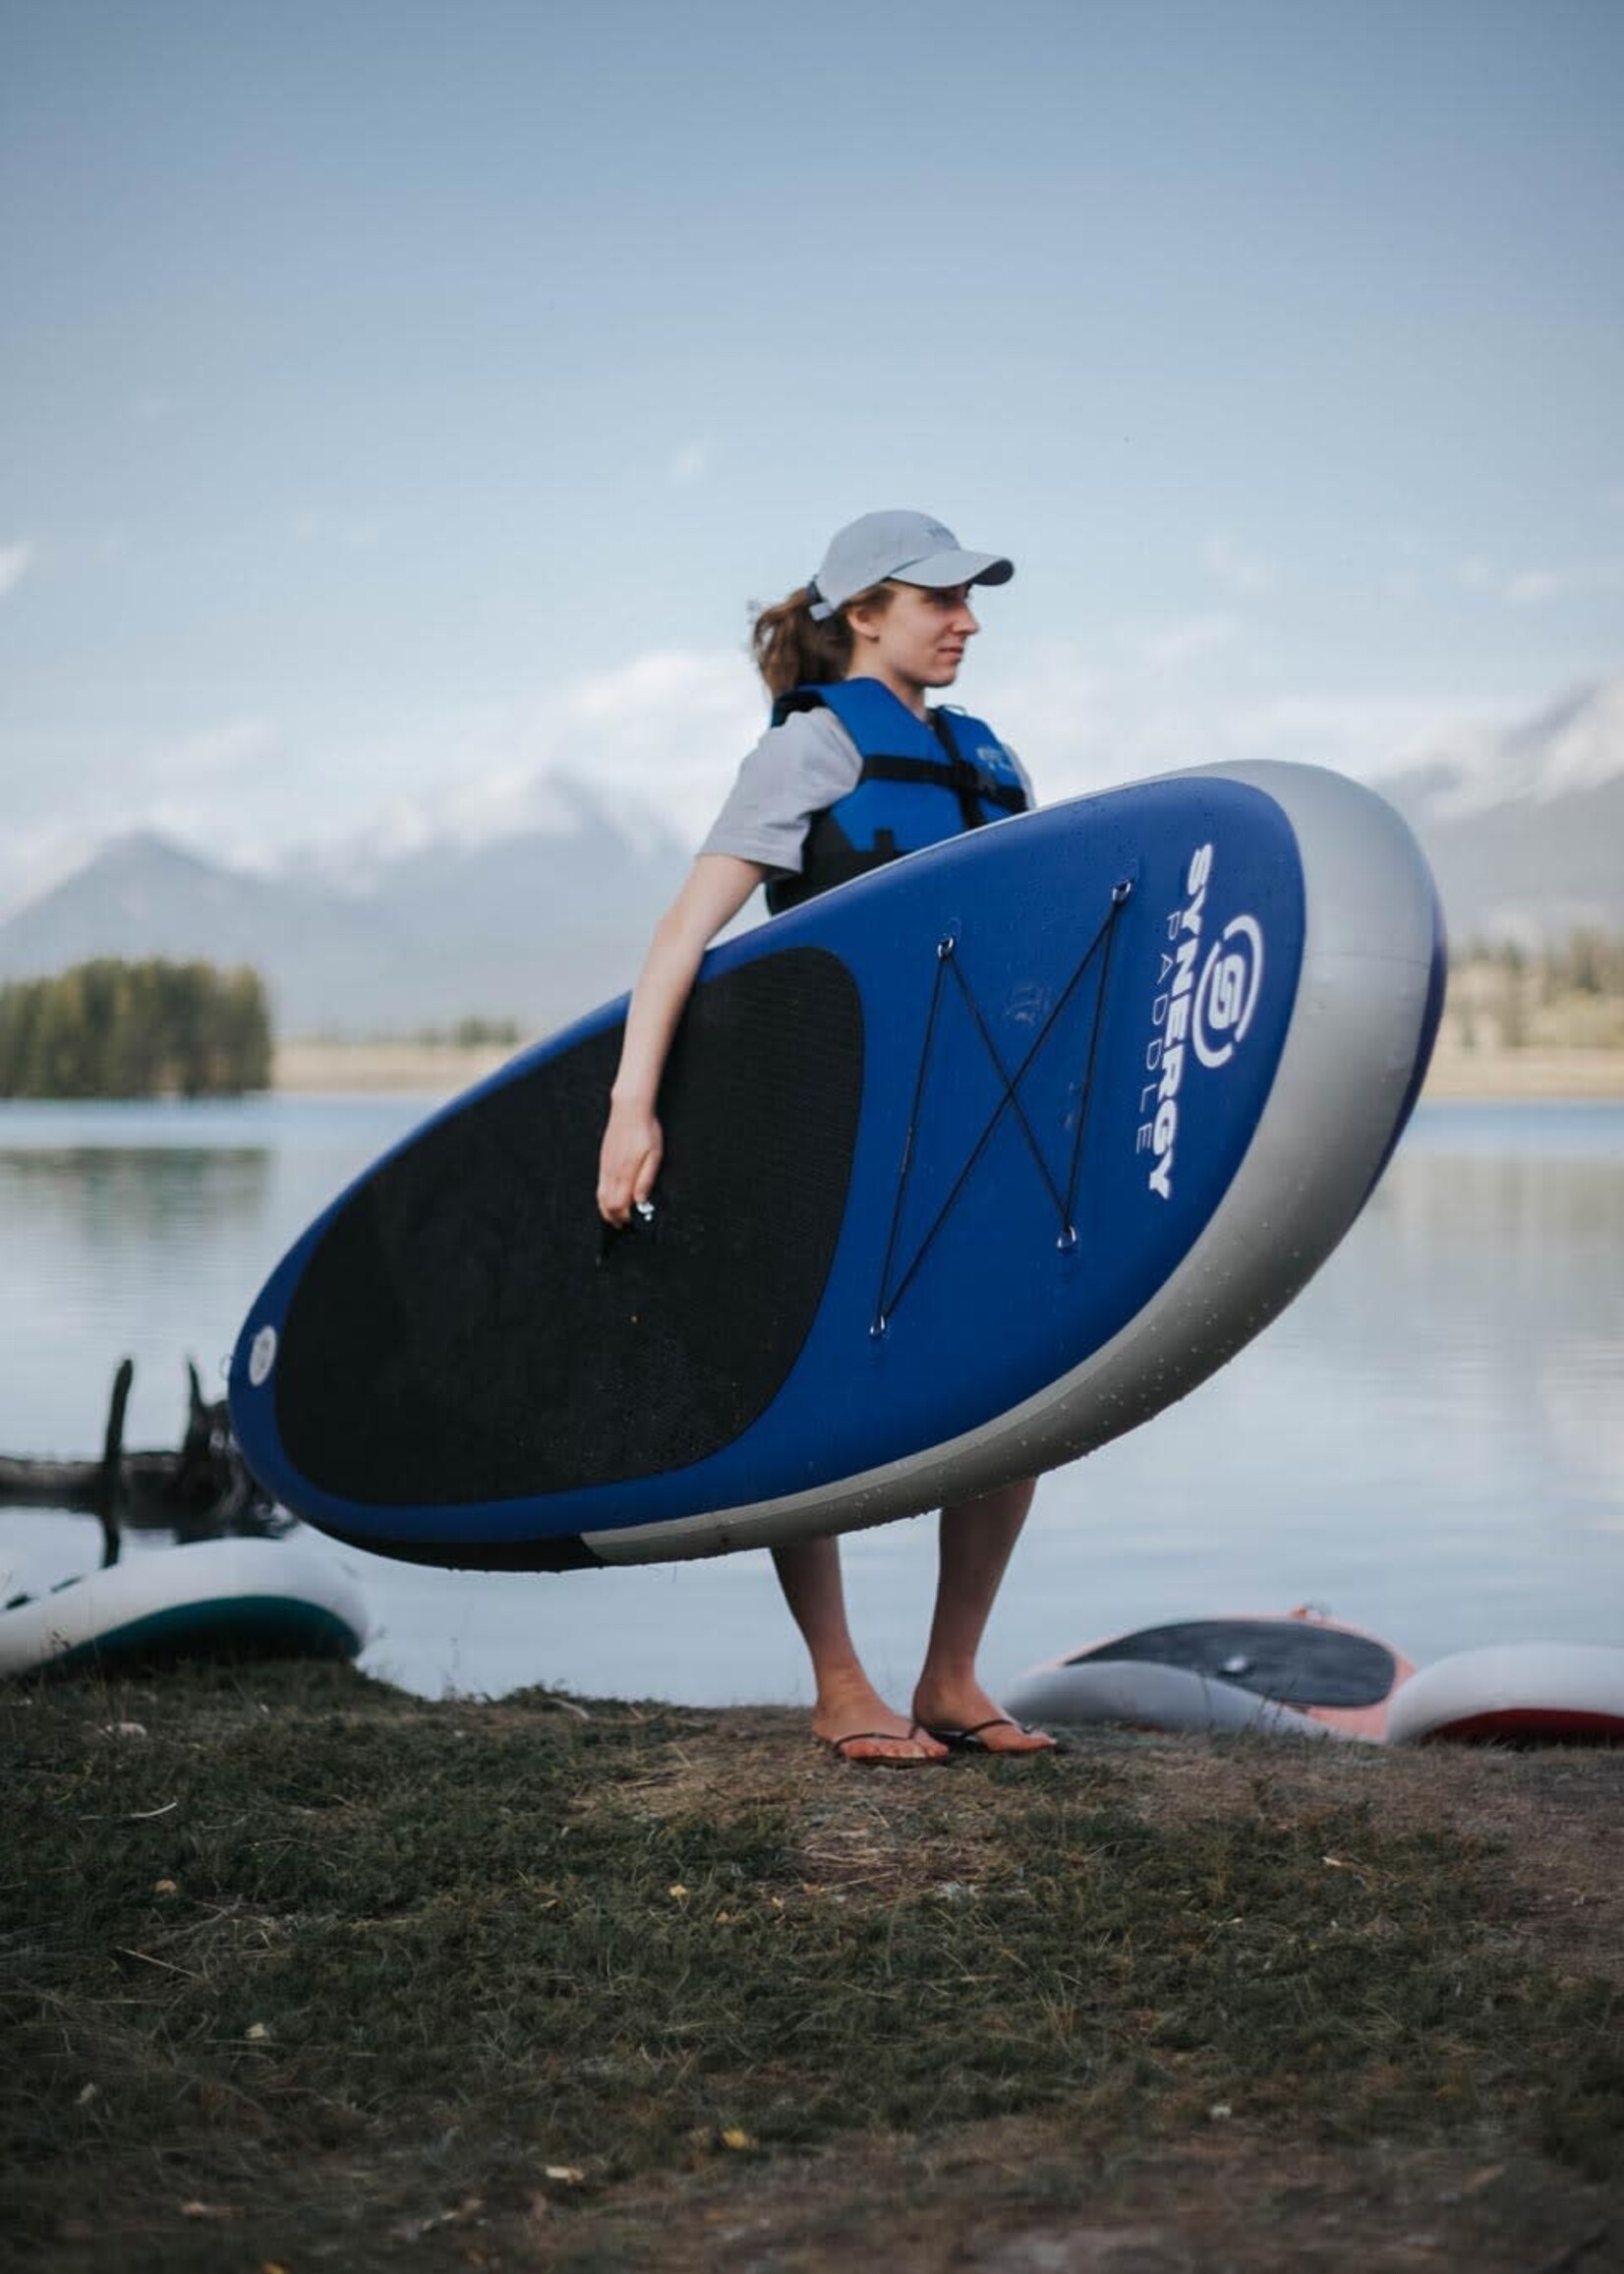 Synergy 10'6 INFLATABLE PADDLE BOARD